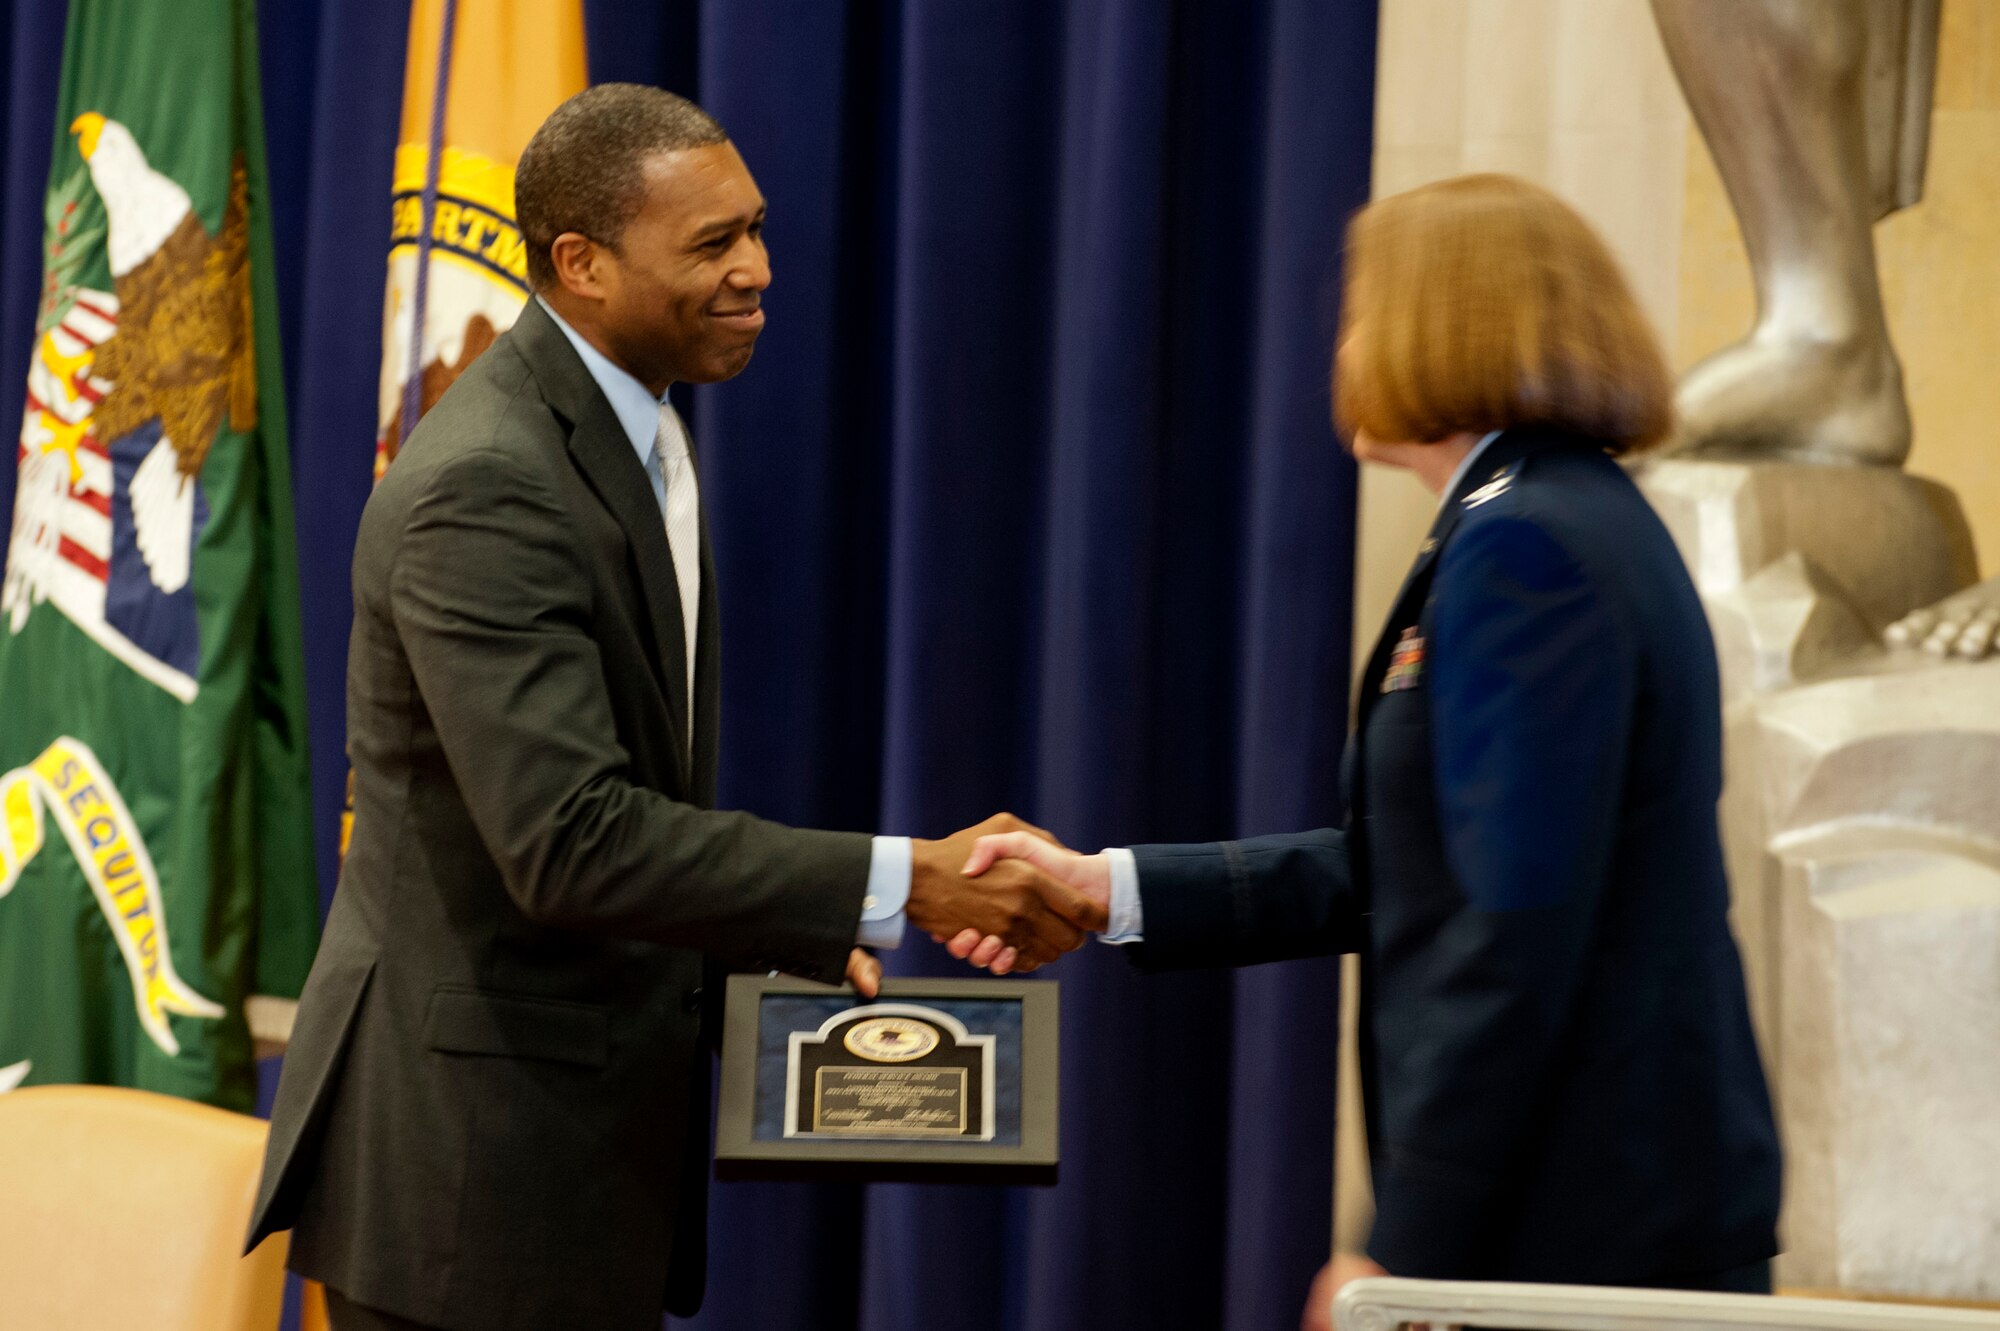 Tony West (left) presents Col. Dawn Hankins with the Federal Service Award during the 2014 Justice Department’s National Crime Victims’ Rights Service Awards ceremony, April 9, 2014, at the Department of Justice, Washington D.C. West is the associate attorney general of the United States. Hawkins is the chief of the Air Force Special Victims’ Counsel Program  (U.S. Air Force photo/Staff Sgt. Carlin Leslie)